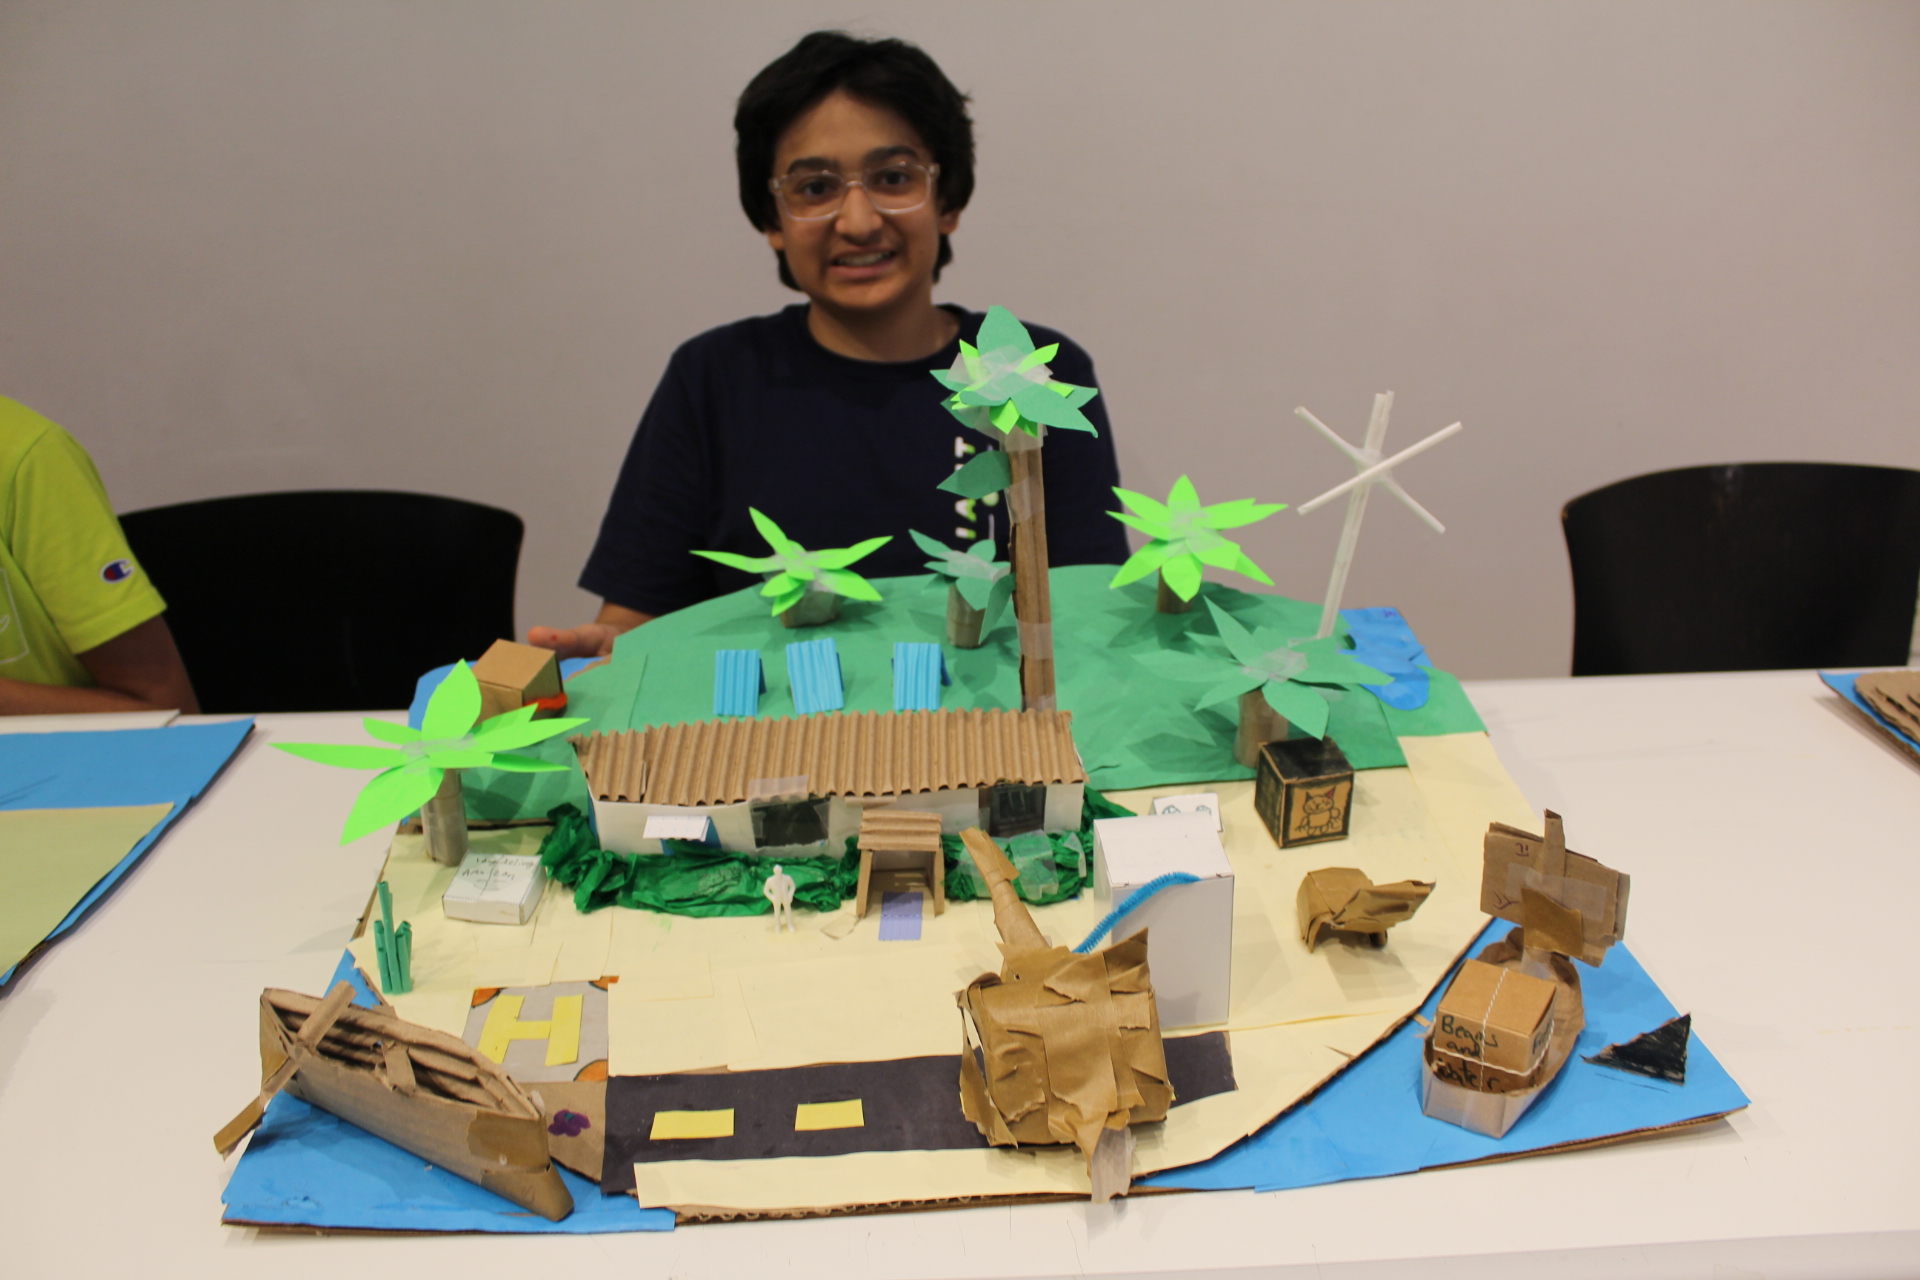 Middle school student posing with model of house and landscape